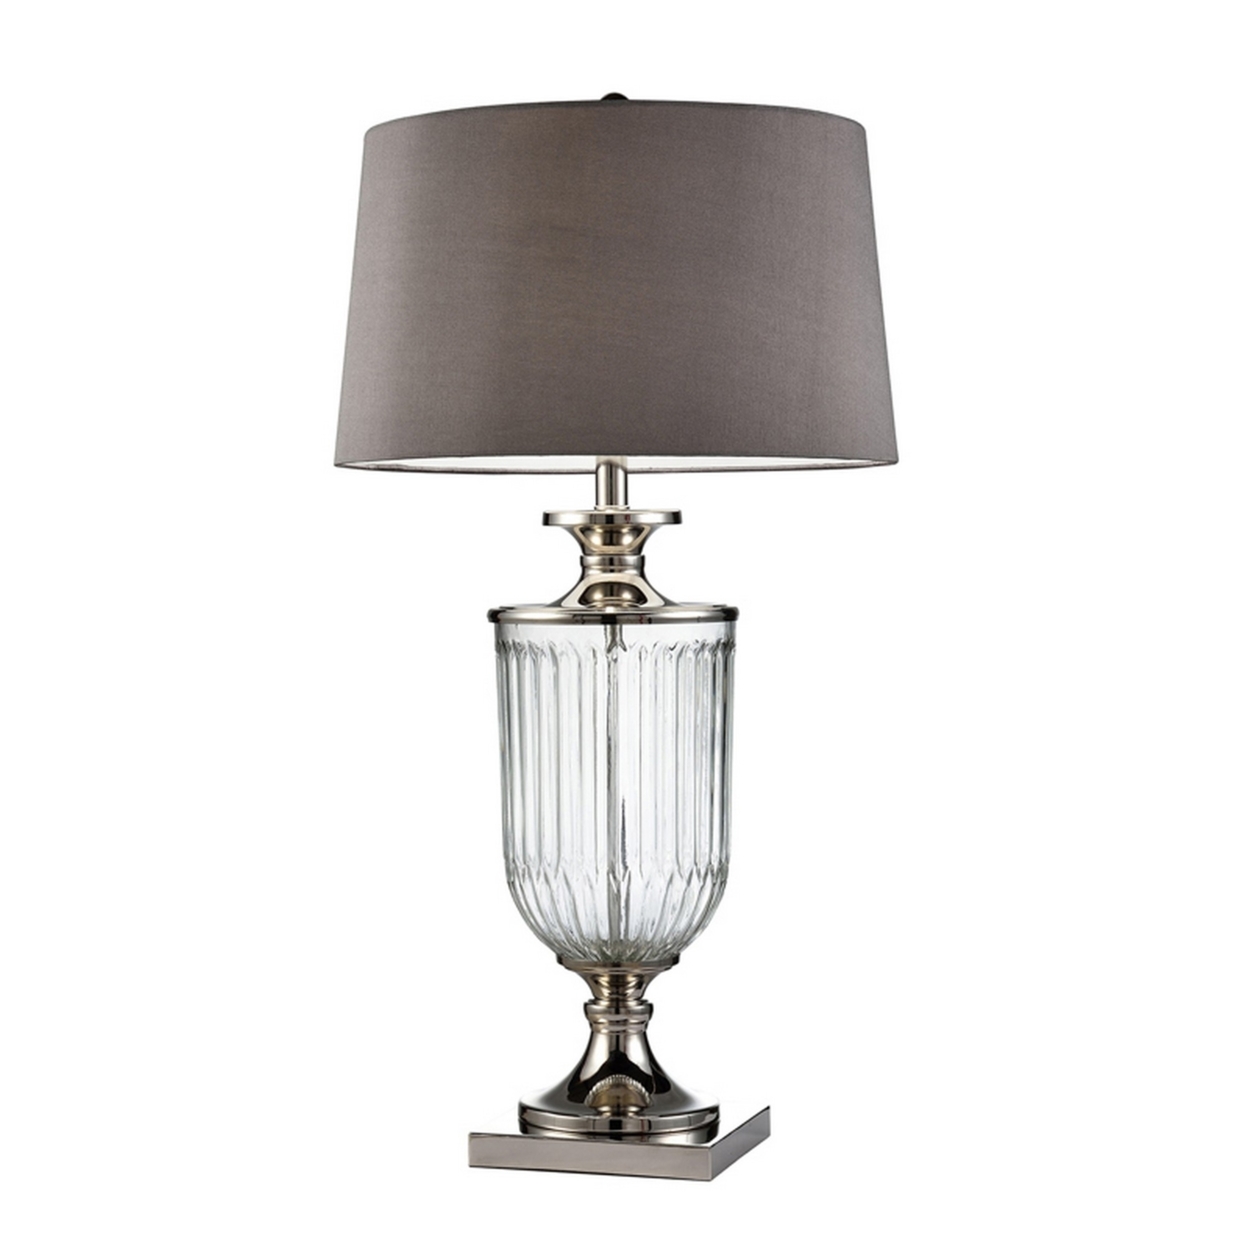 Table Lamp With Glass Pedestal Base And Fabric Shade, Chrome- Saltoro Sherpi